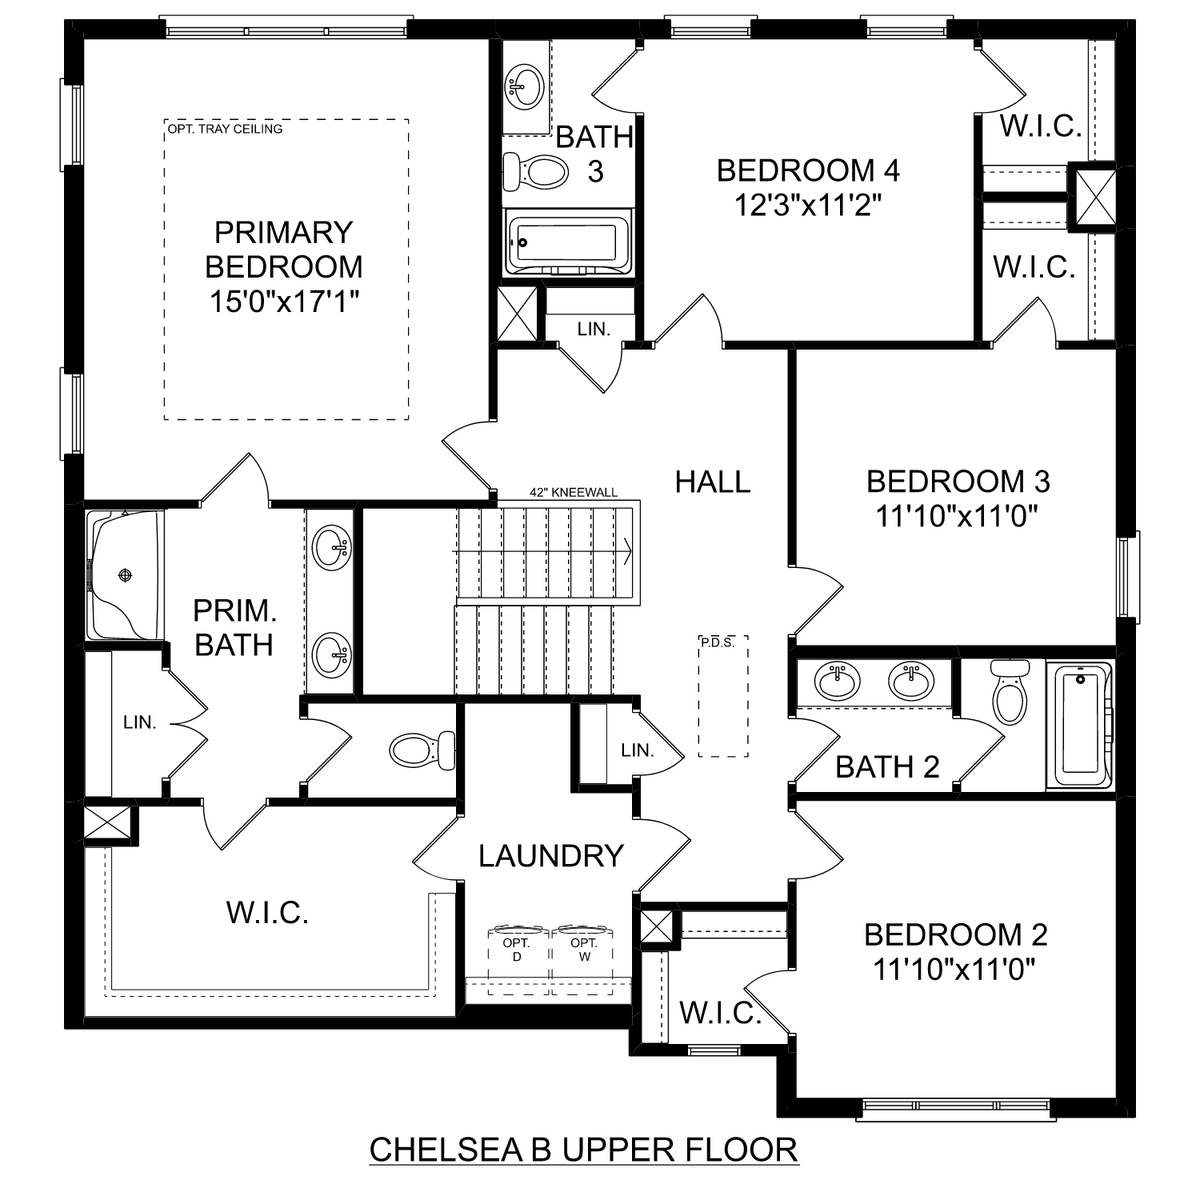 2 - The Chelsea B floor plan layout for 2160 Dawson Lane in Davidson Homes' The Reserve at North Ridge community.